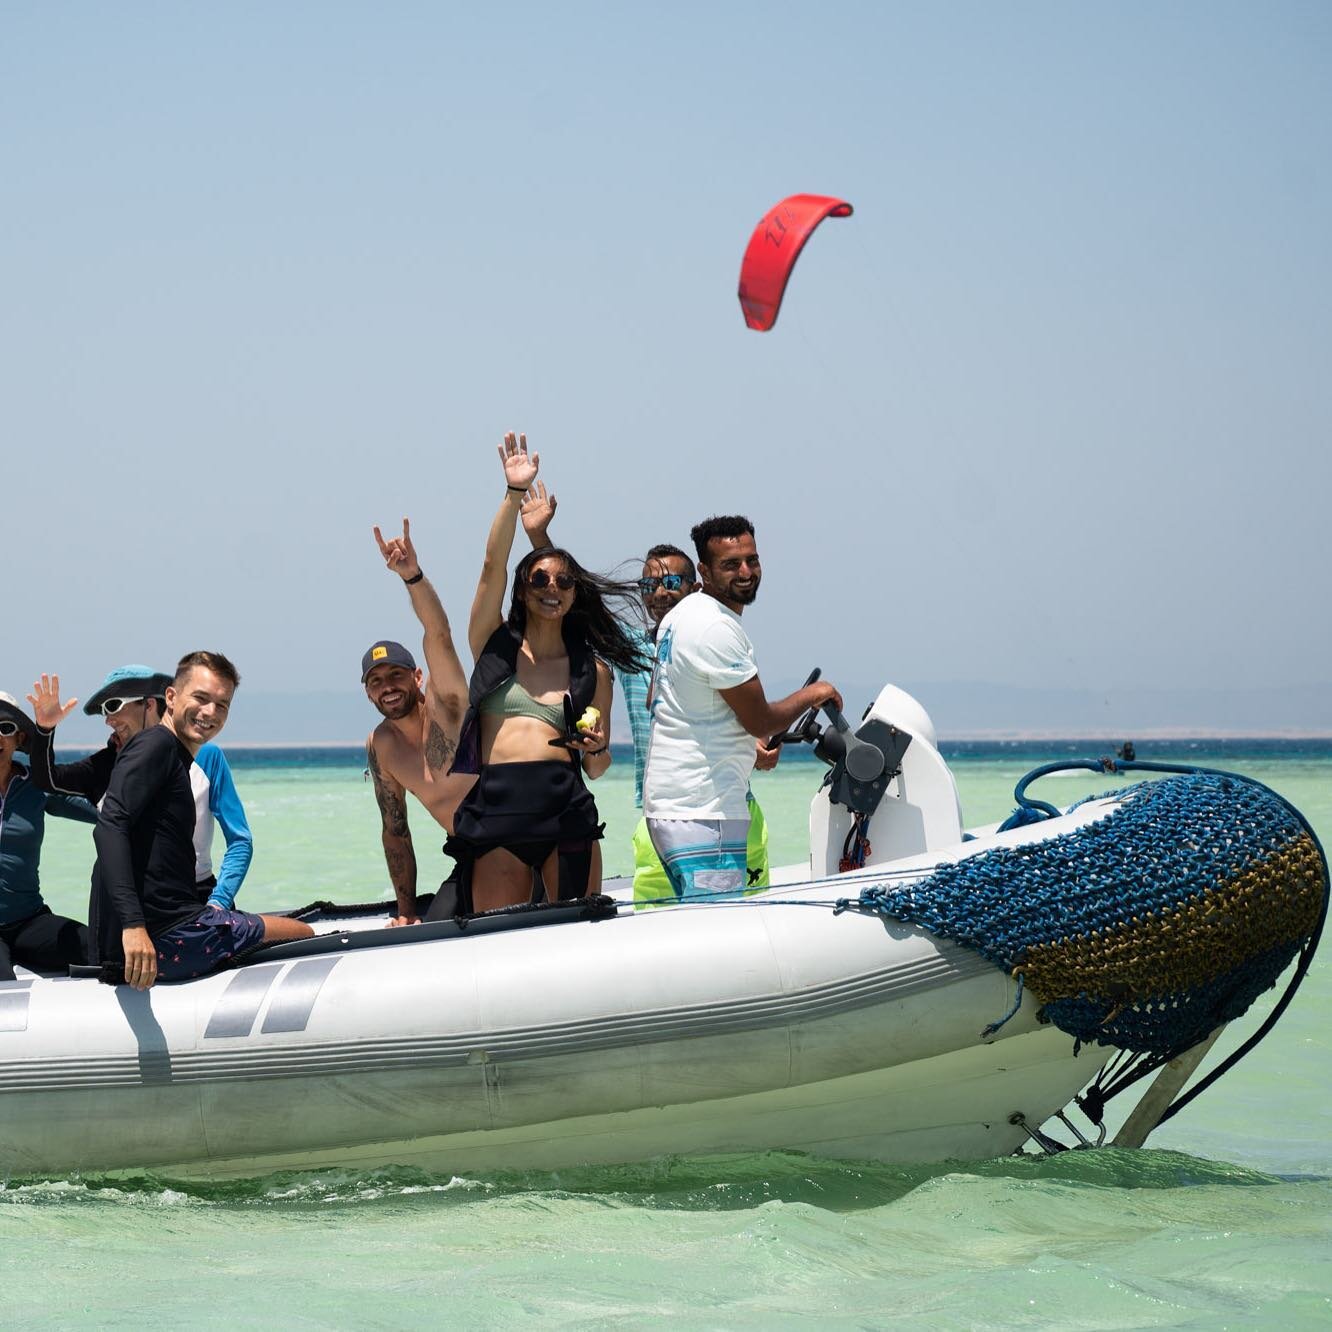 Your taxi to the Kitespot 🚖 

We kitesurf from sunrise to sunset on the kitecruise in Egypt, only stopping for some food in between. Guaranteed the most time on the water you can get in a week!

#egypt #kitecruise #redsea #kitesafari #theriderexperi